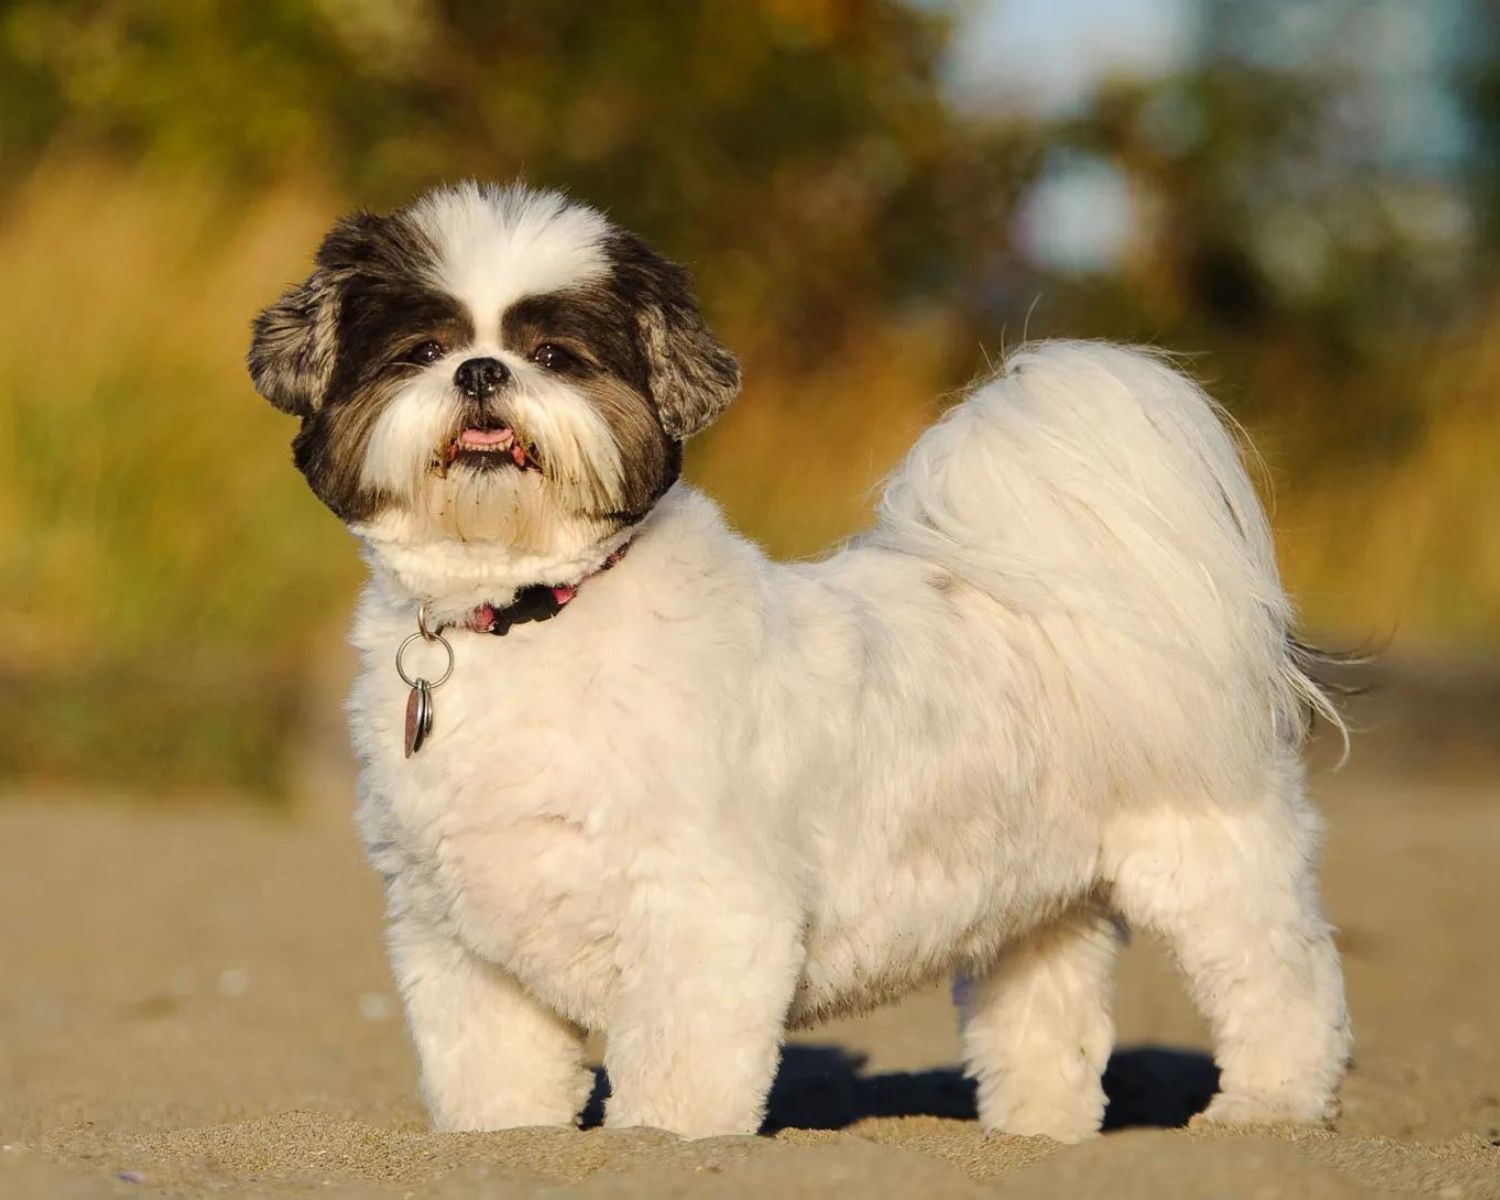 Shih Tzu Dog Breed Guide: Amazing Facts, Health And Care